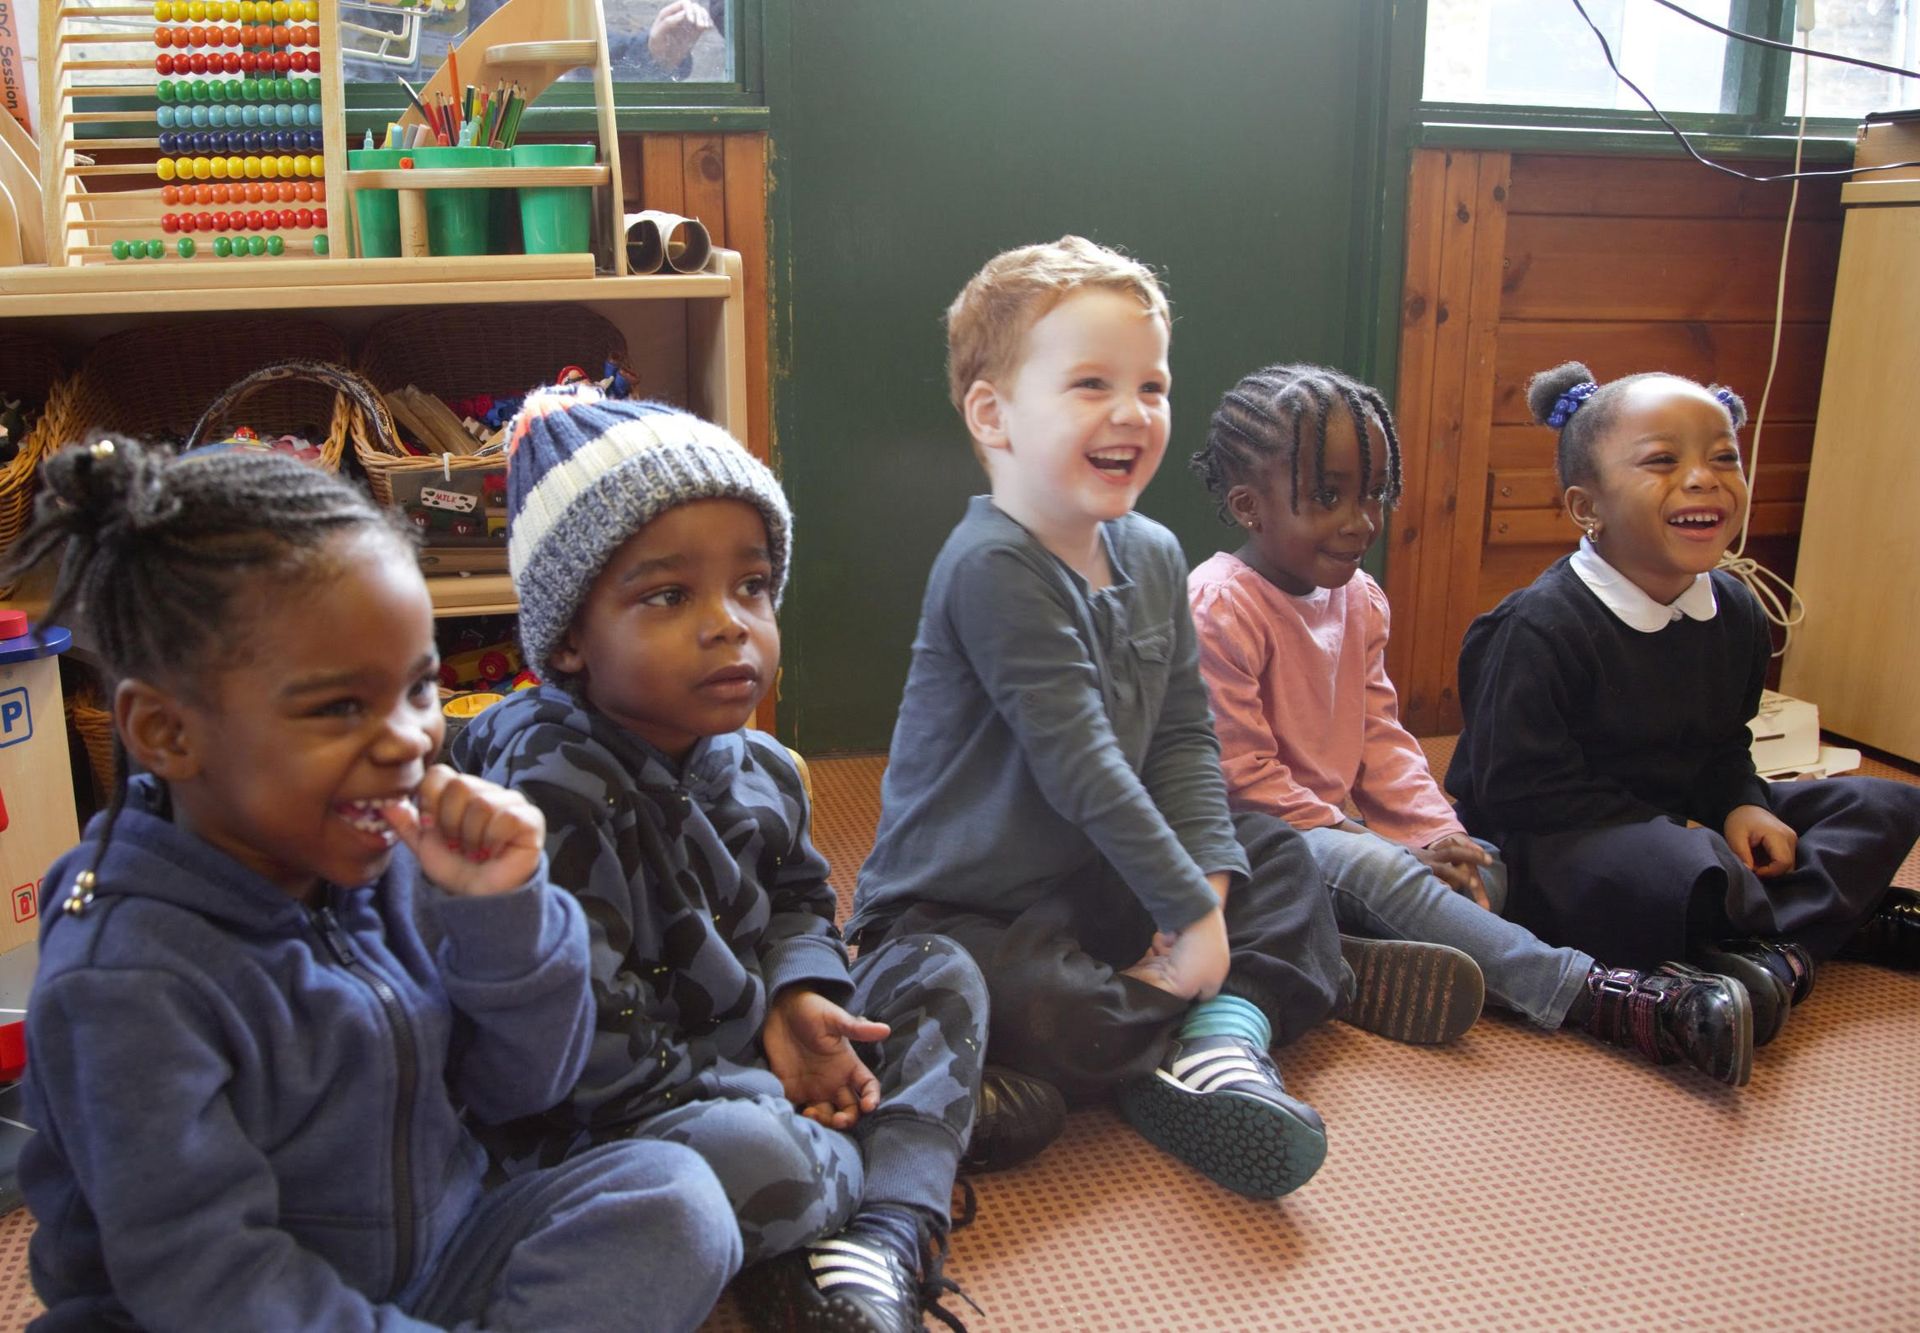 Young children in a nursery class sitting cross-legged on the floor and smiling.